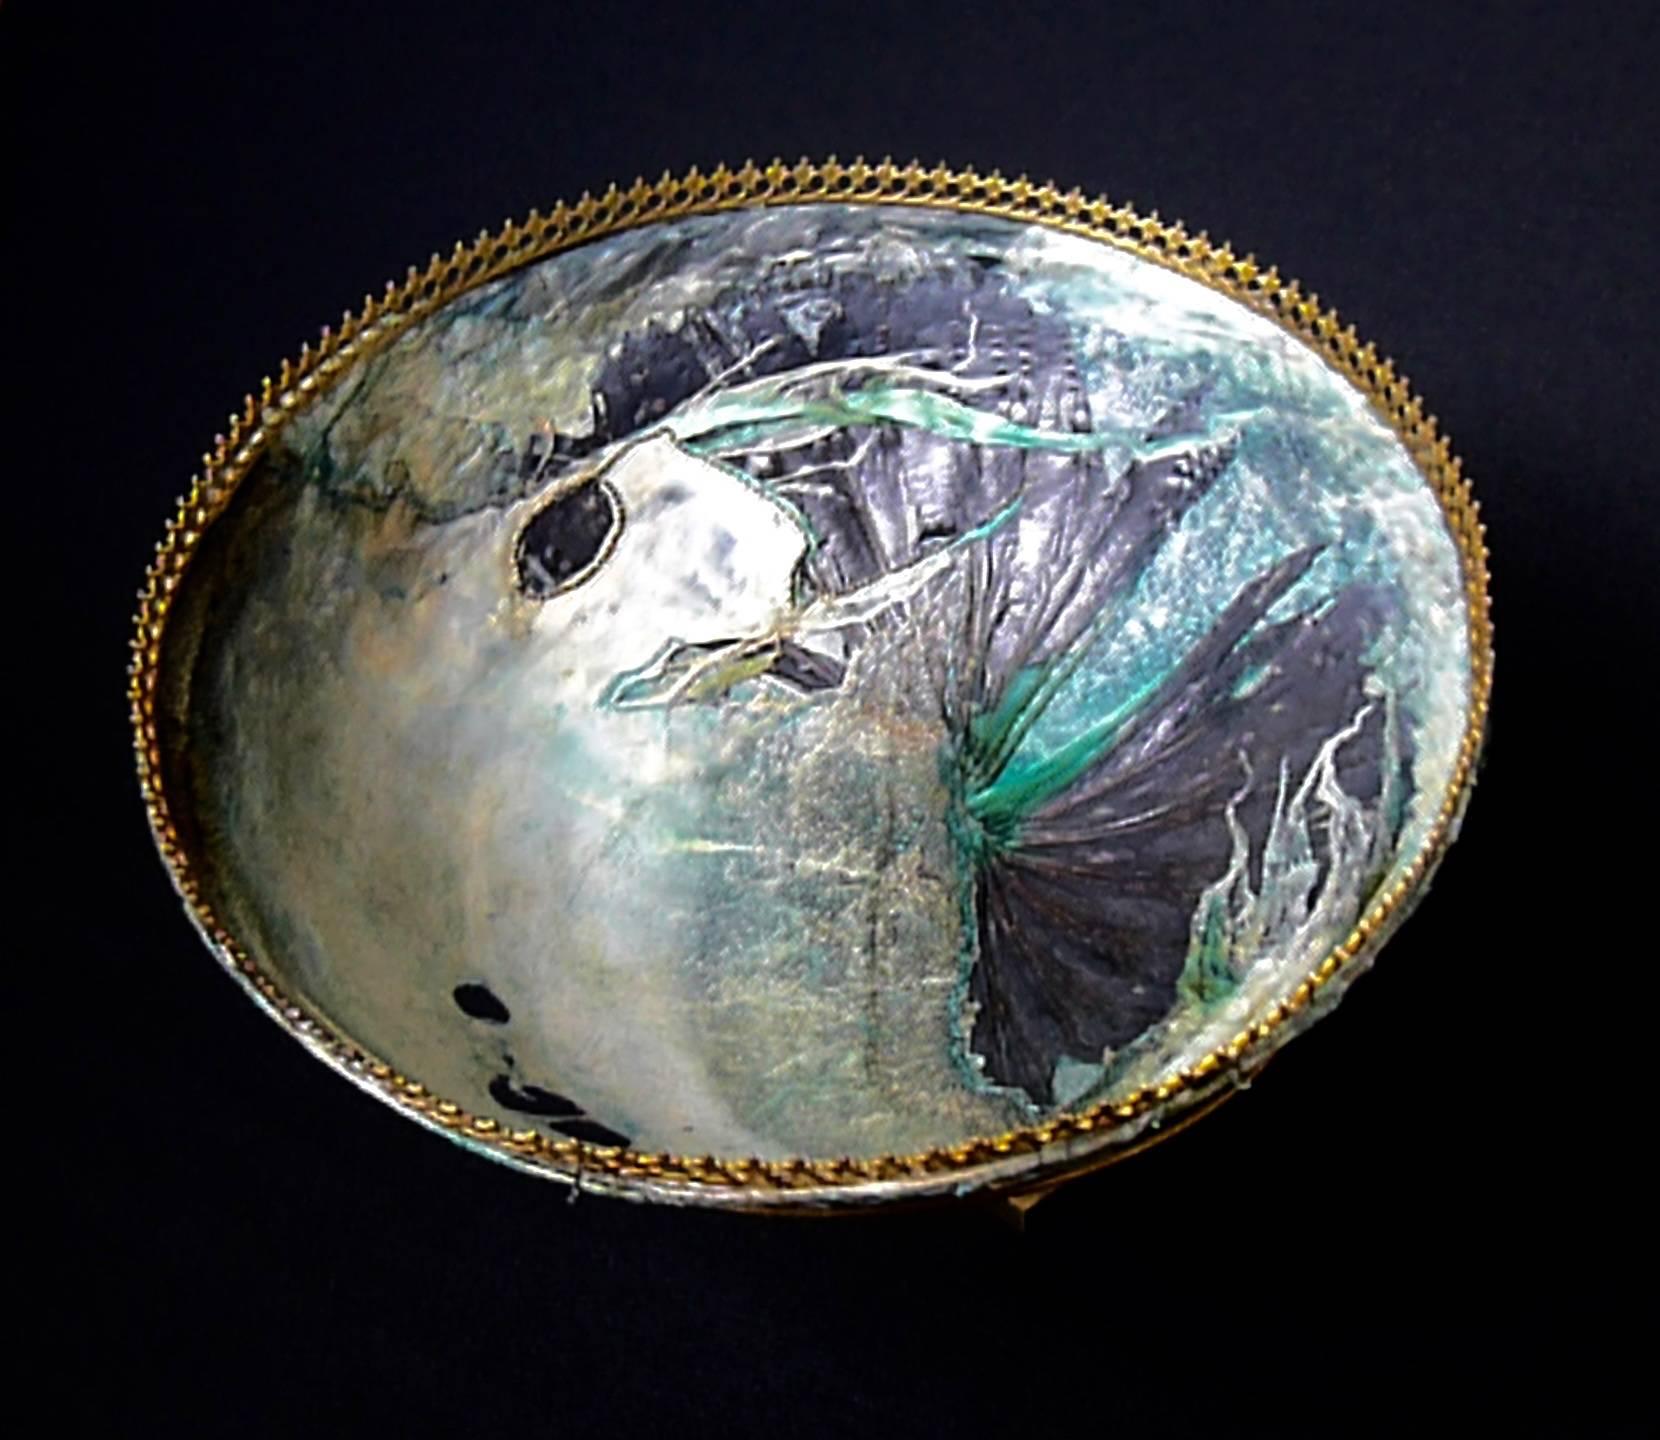 Transfiguration - exquisite fish leather bowl with brass filigree mount and rim For Sale 2